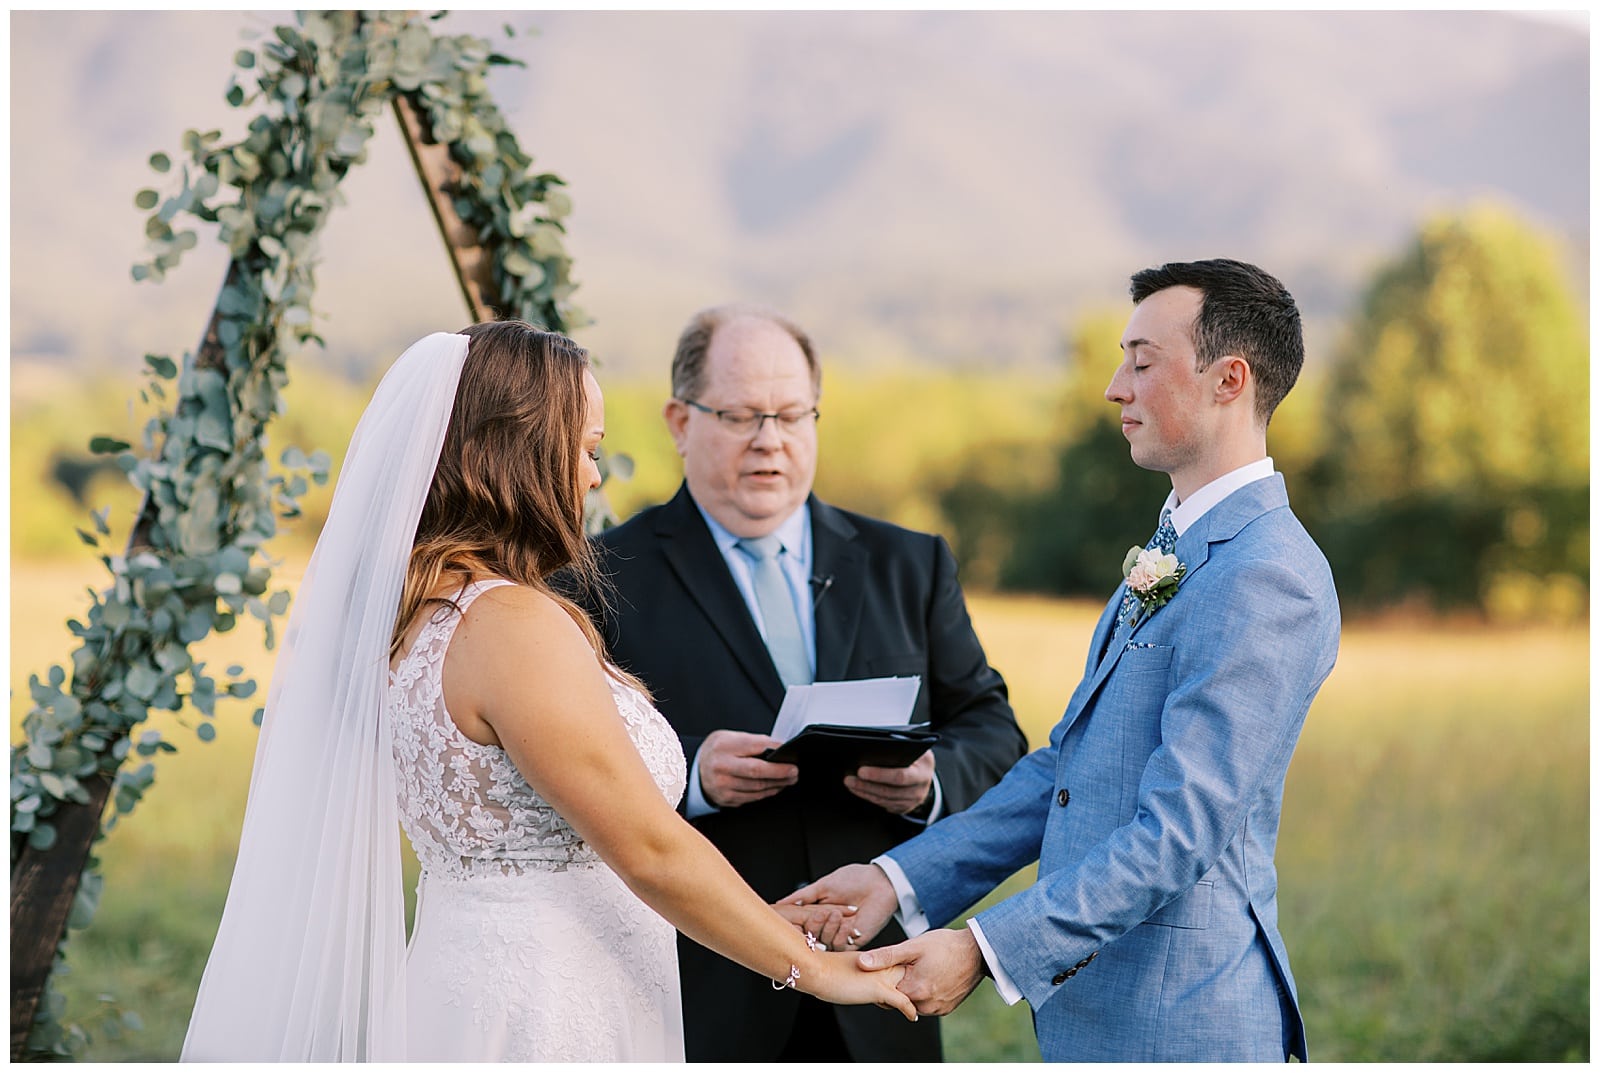 A groom in a periwinkle colored tux and bowtie stands across from a bride in a white dress as they hold hands with a priest behind them reading from a book in the middle of a field with the Smoky mountains in the backdrop